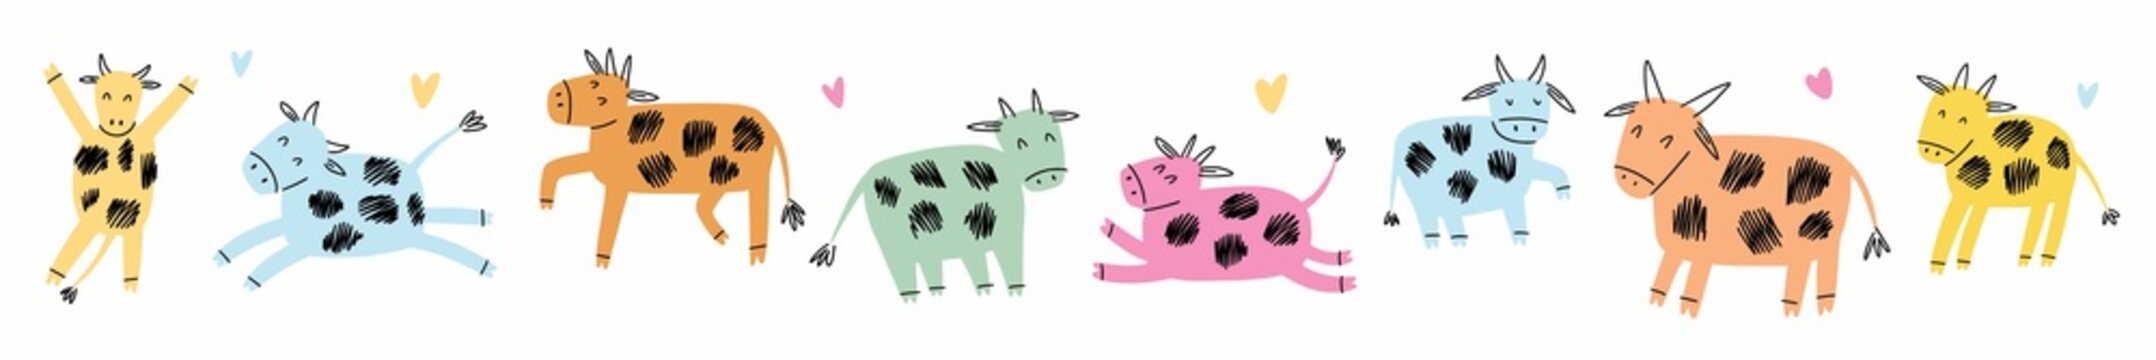 Horizontal illustration with cows drawn by hand in the style of a doodle